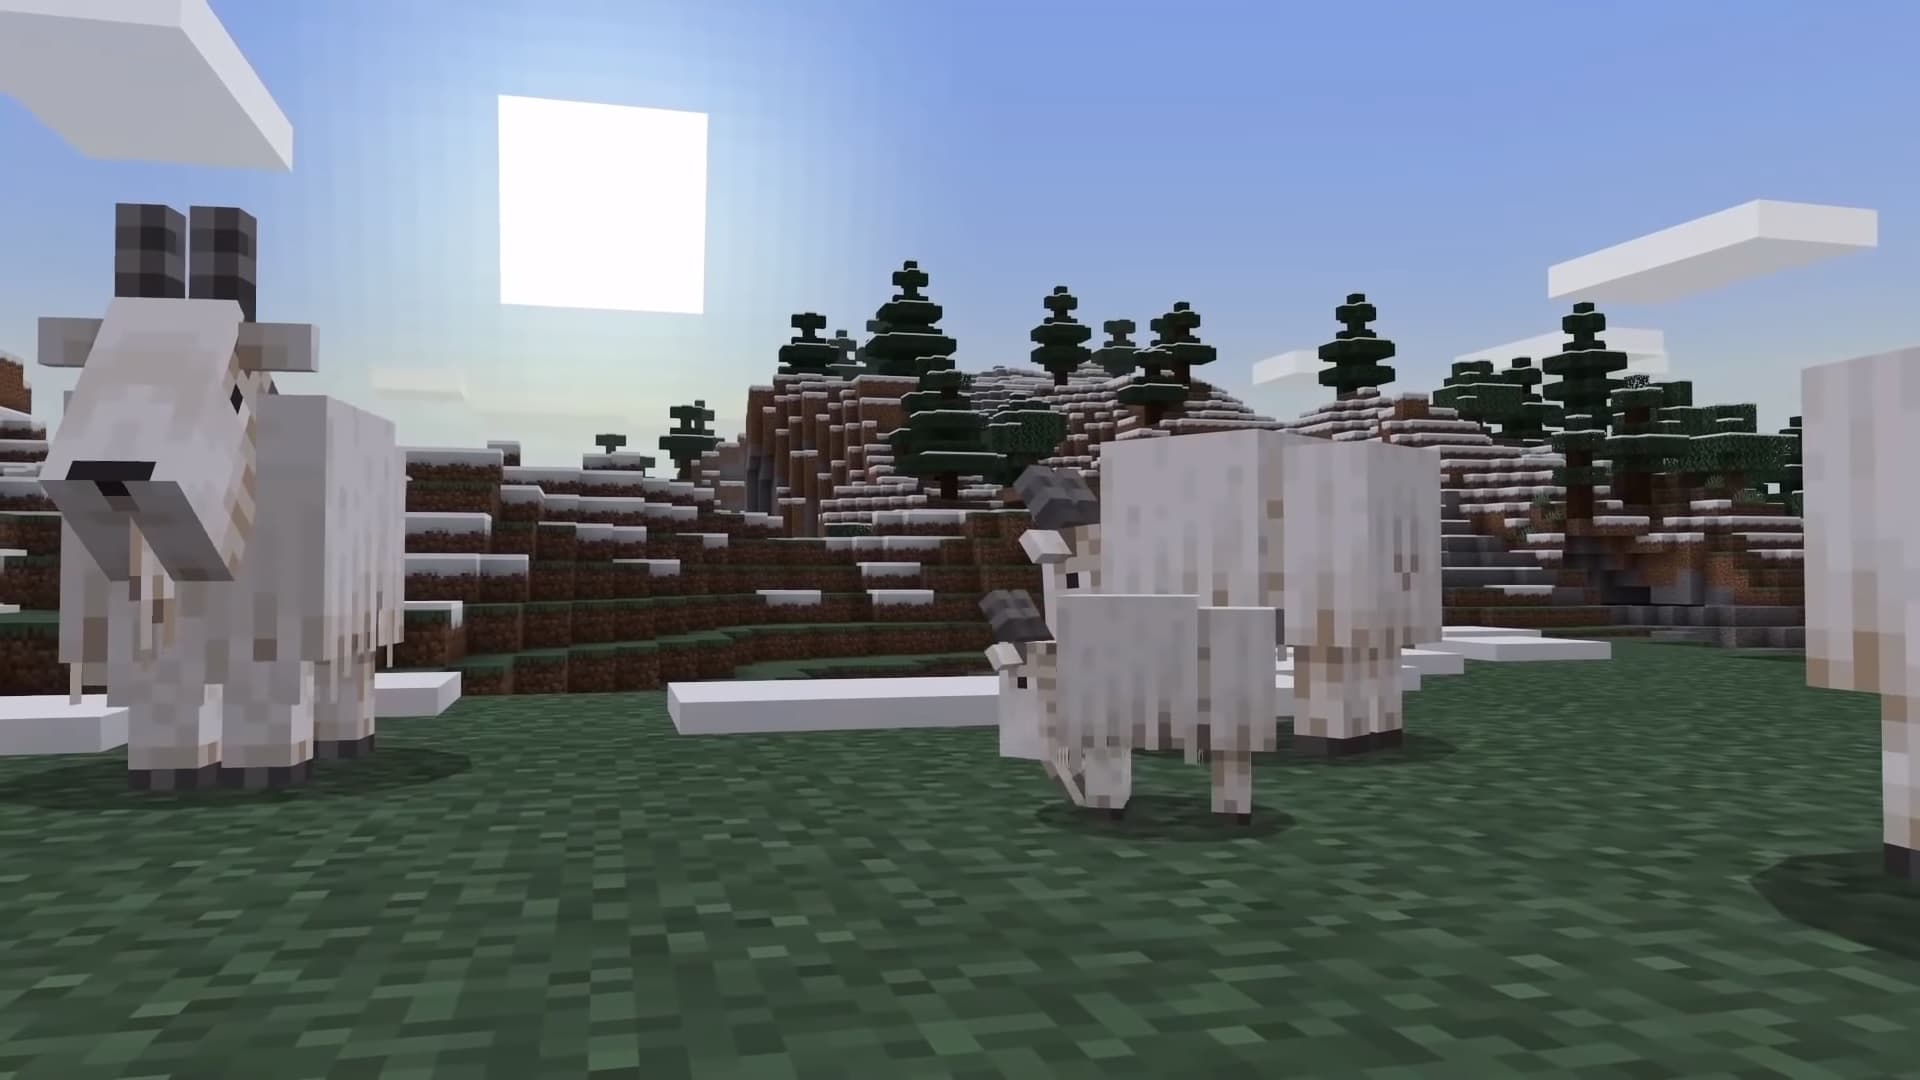 Minecraft goats - How to tame and breed them ?Minecraft goats - How to tame and breed them ?